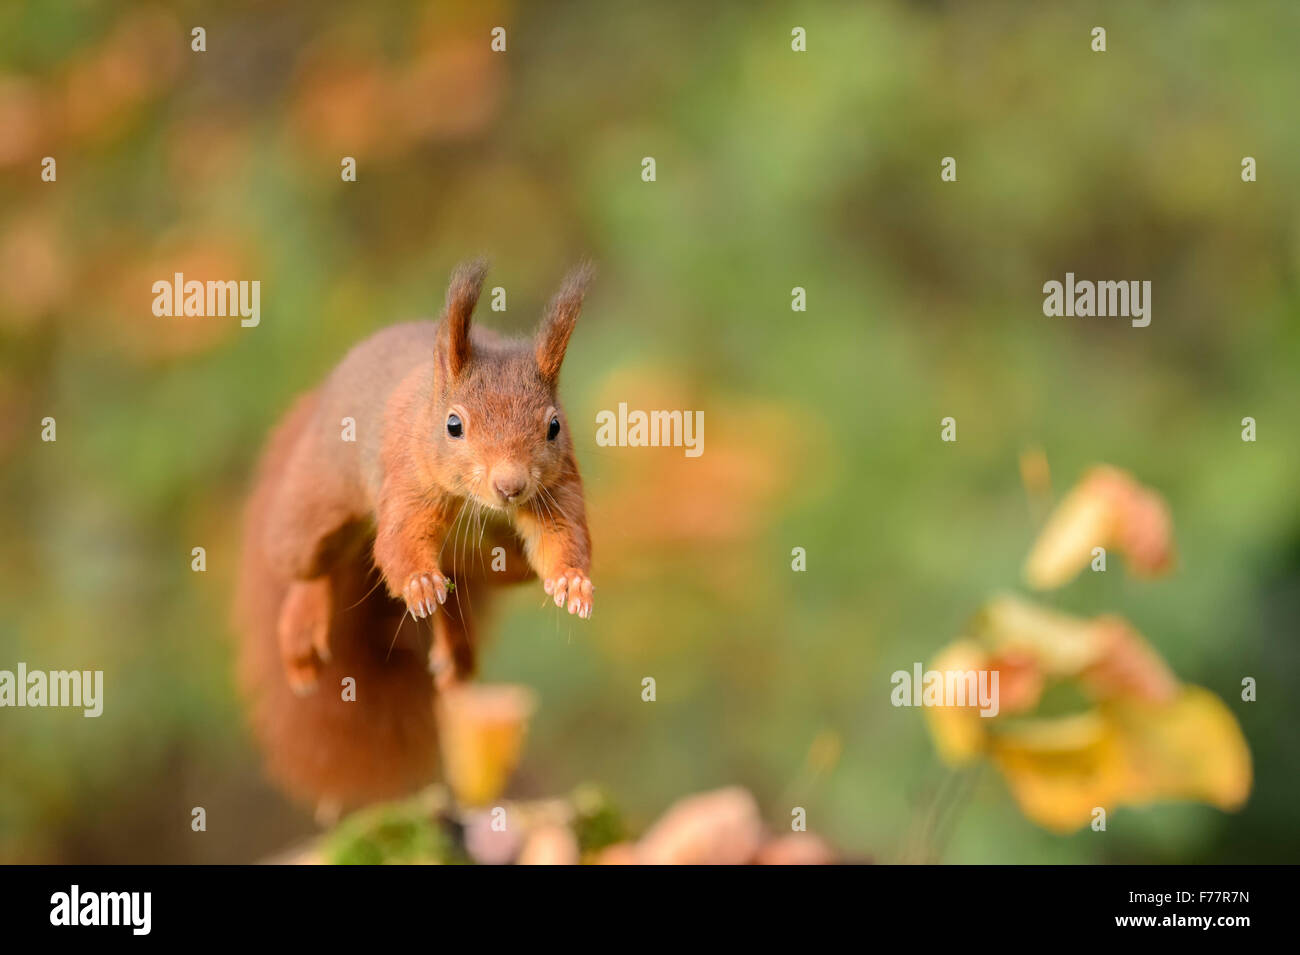 Leaping red squirrel, jumping frontal towards the viewer Stock Photo